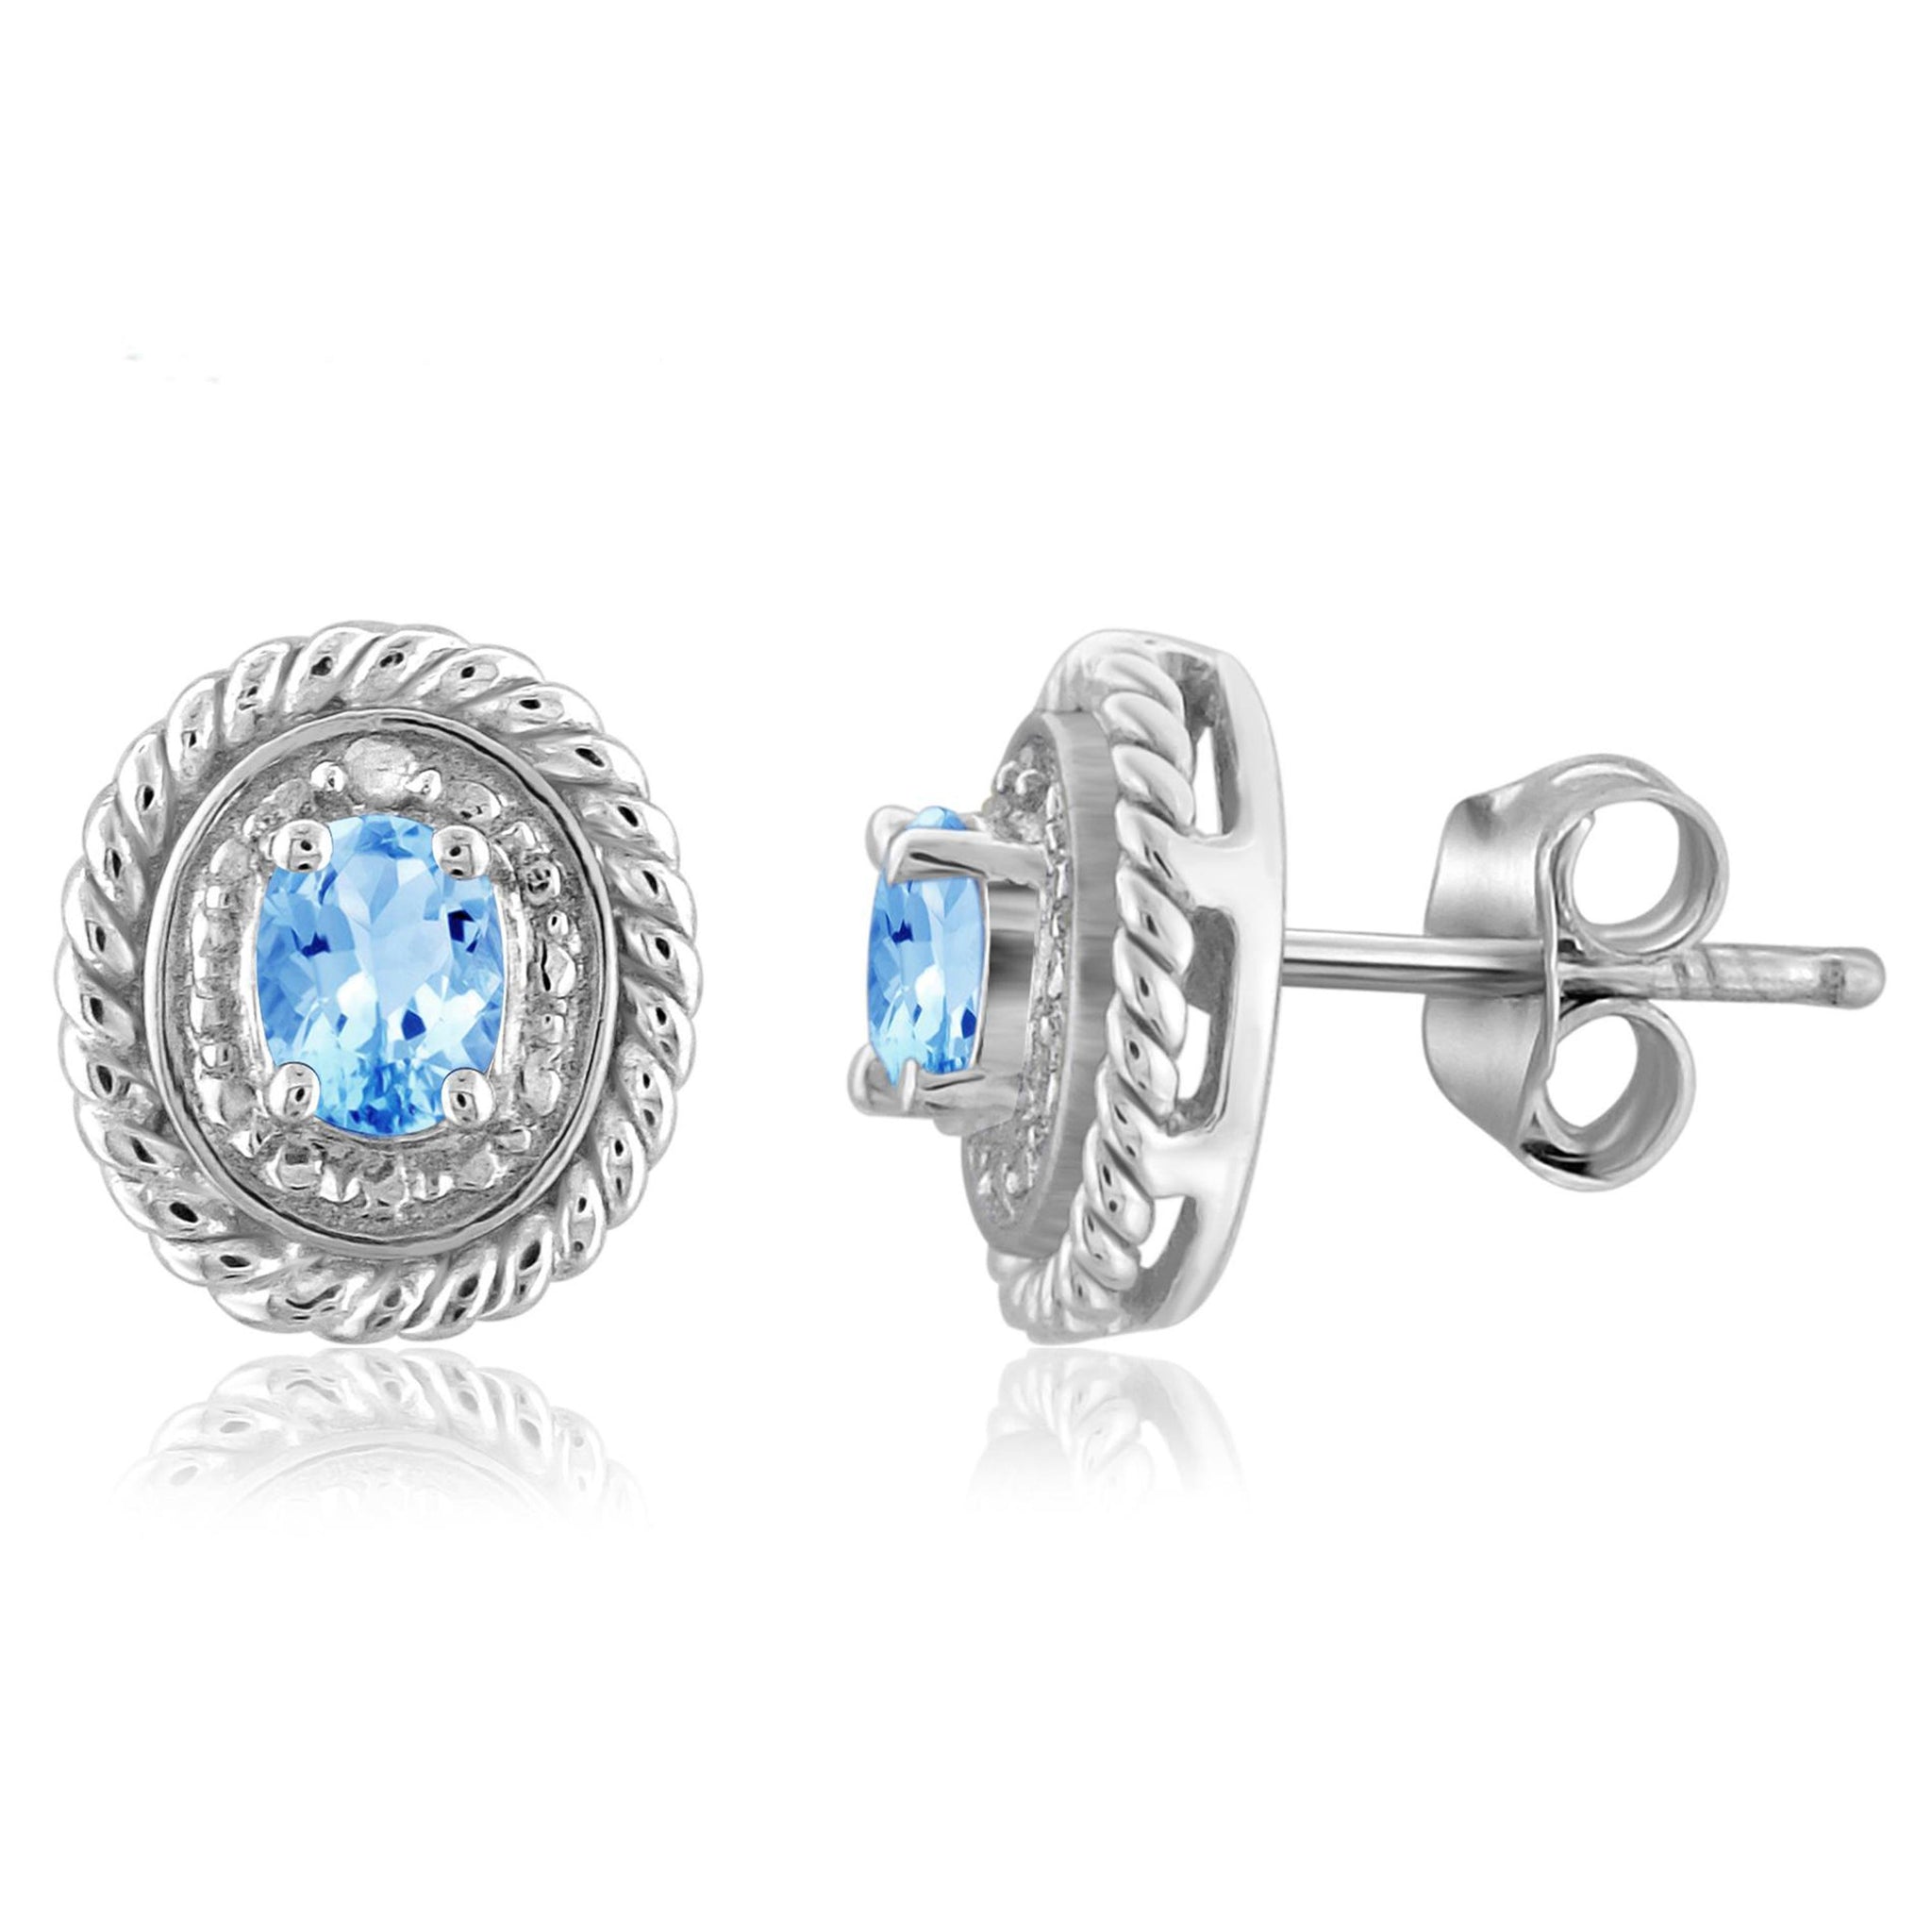 JewelonFire 1/3 Carat T.G.W. Blue Topaz And White Diamond Accent Sterling Silver Stud Earrings - Assorted Colors